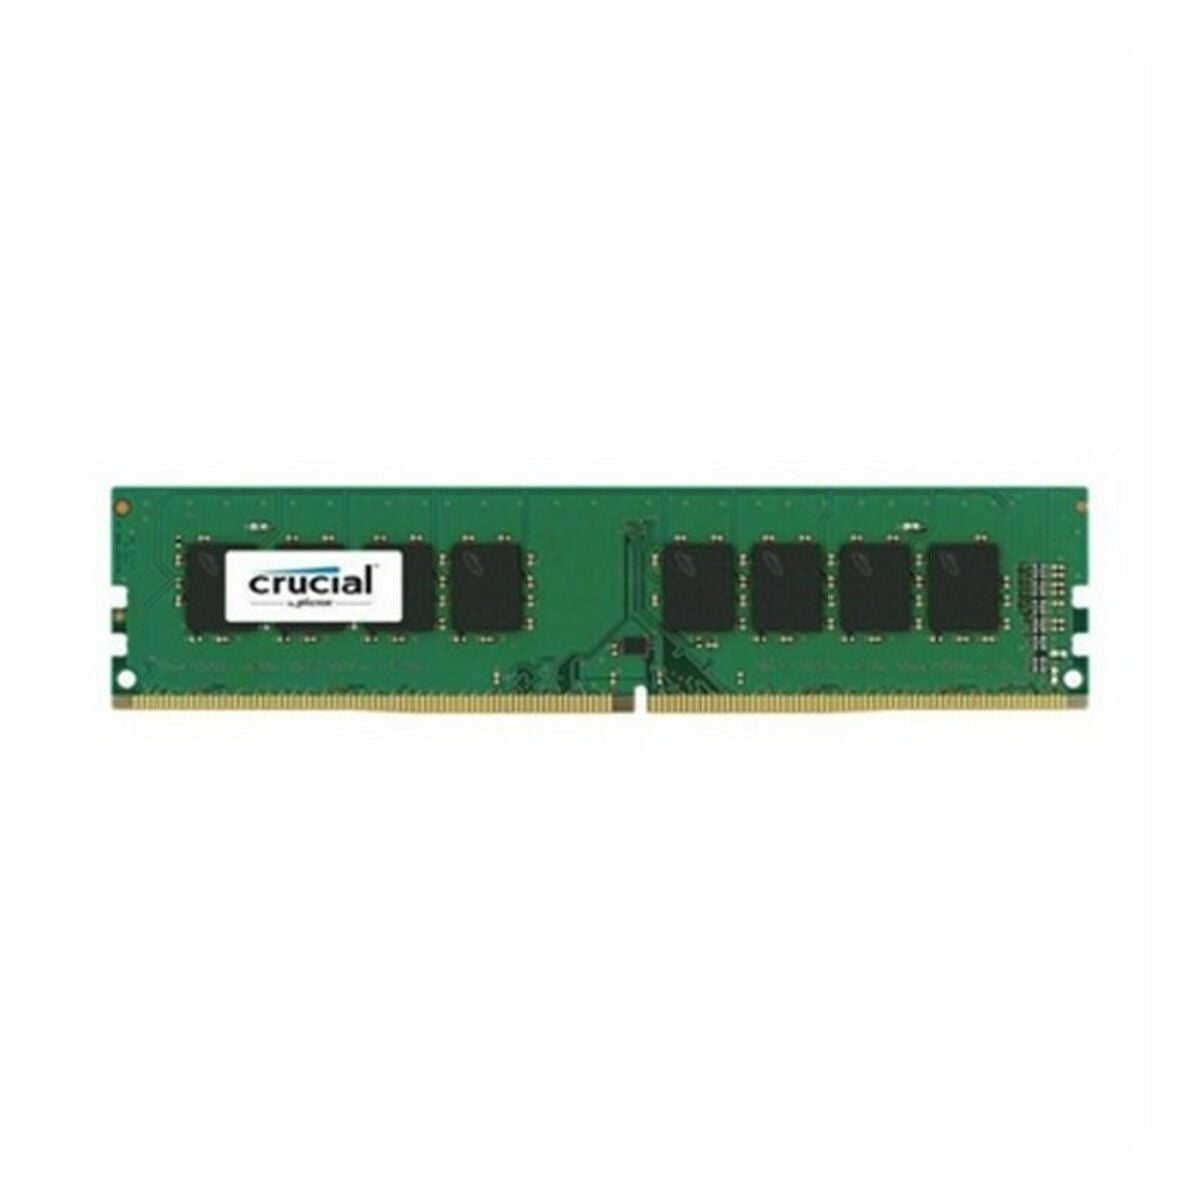 RAM Memory Crucial DDR4 2400 mhz, Crucial, Computing, Components, ram-memory-crucial-ddr4-2400-mhz, :RAM 16 GB, :RAM 4 GB, :RAM 8 GB, Brand_Crucial, Capacity_16 GB RAM, Capacity_4 GB RAM, Capacity_8 GB RAM, category-reference-2609, category-reference-2803, category-reference-2807, category-reference-t-19685, category-reference-t-19912, category-reference-t-21360, computers / components, Condition_NEW, Price_20 - 50, Teleworking, RiotNook